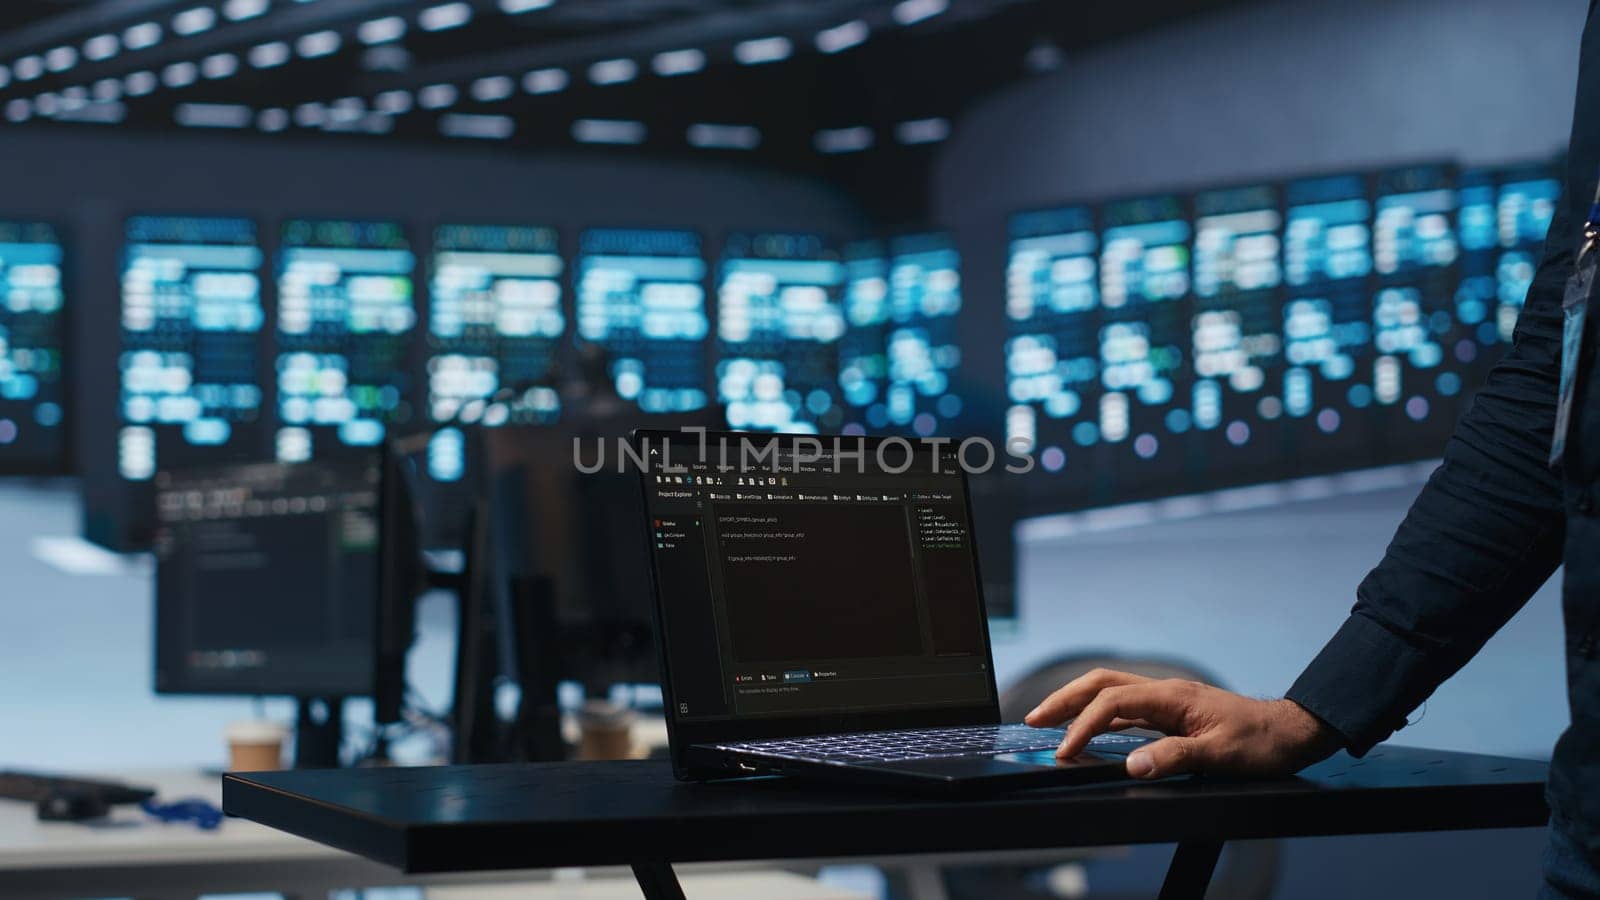 IT support employee writing code on laptop in high tech facility with server rows providing computing resources for different workloads. System administrator uses notebook to oversee supercomputers